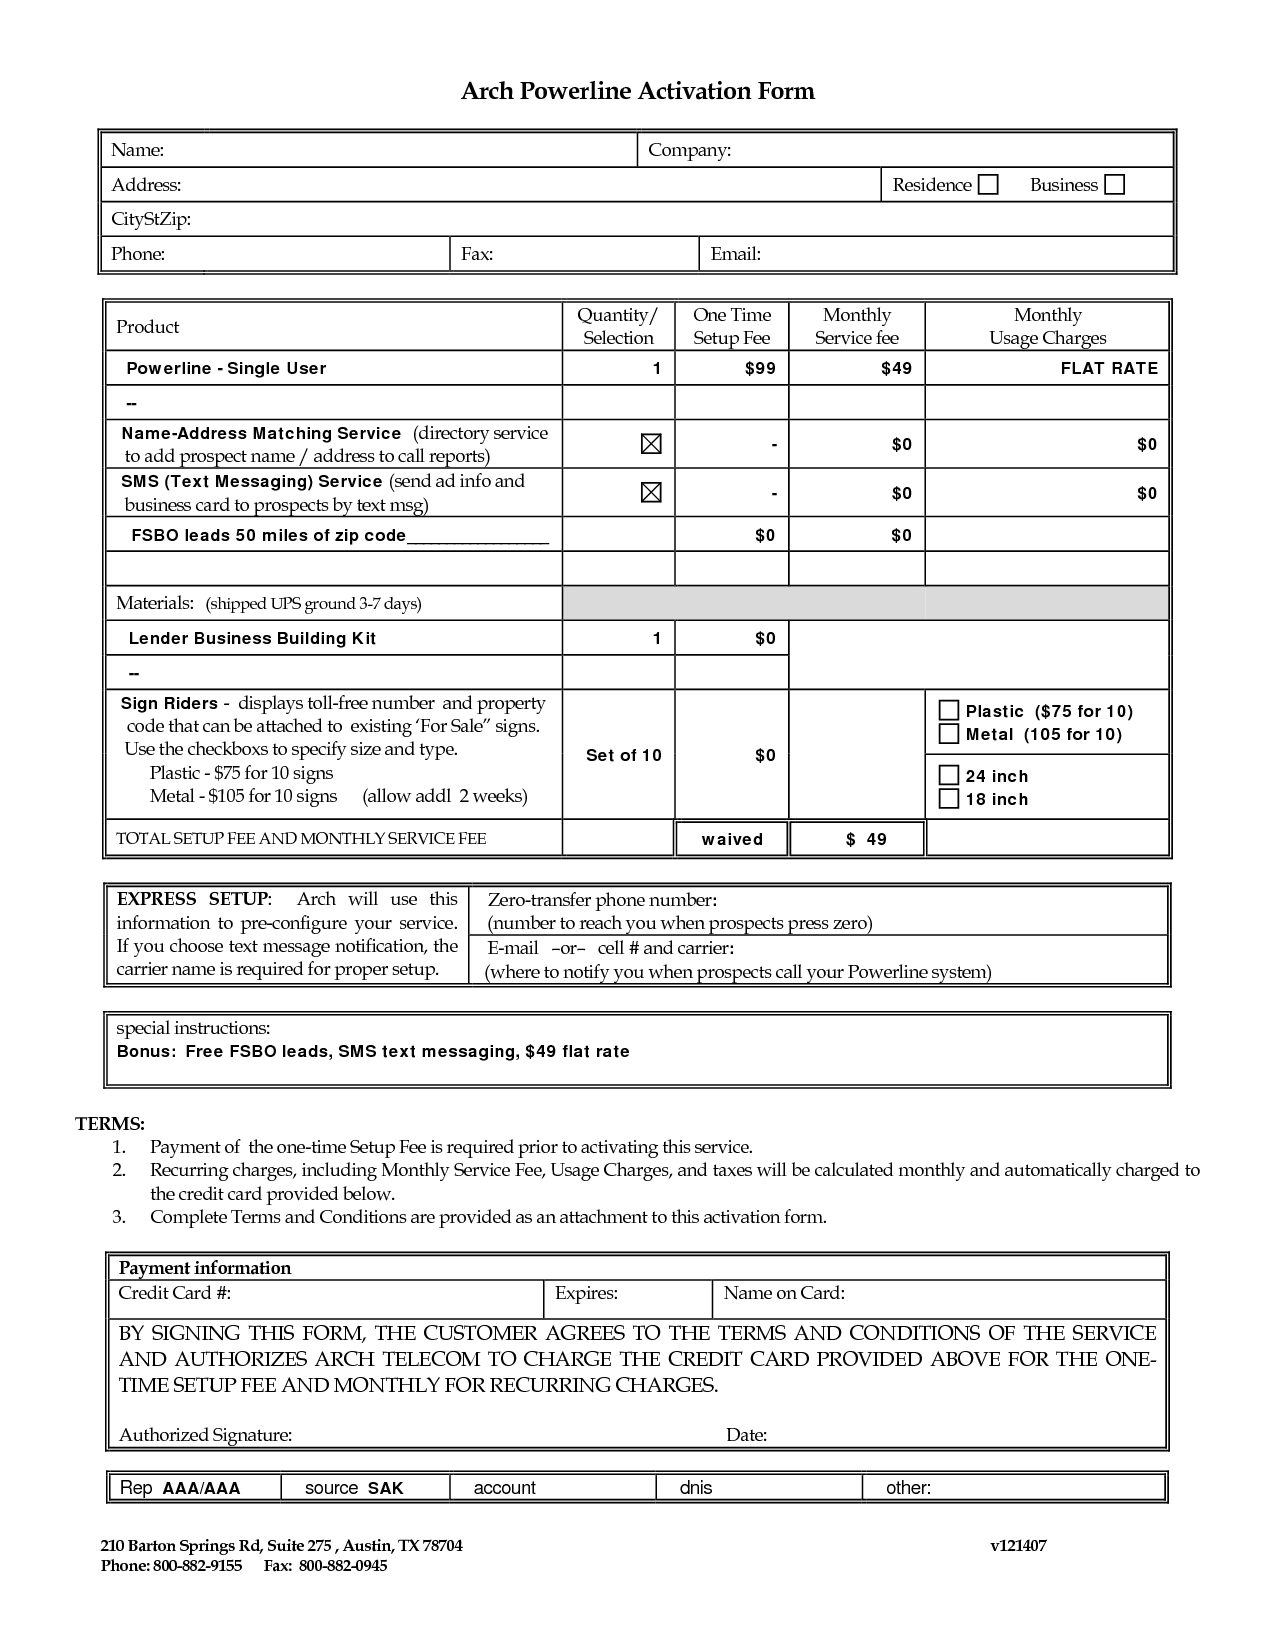 020 Sales Call Reporting Template Weekly Report 21554 With Regard To Sales Rep Call Report Template